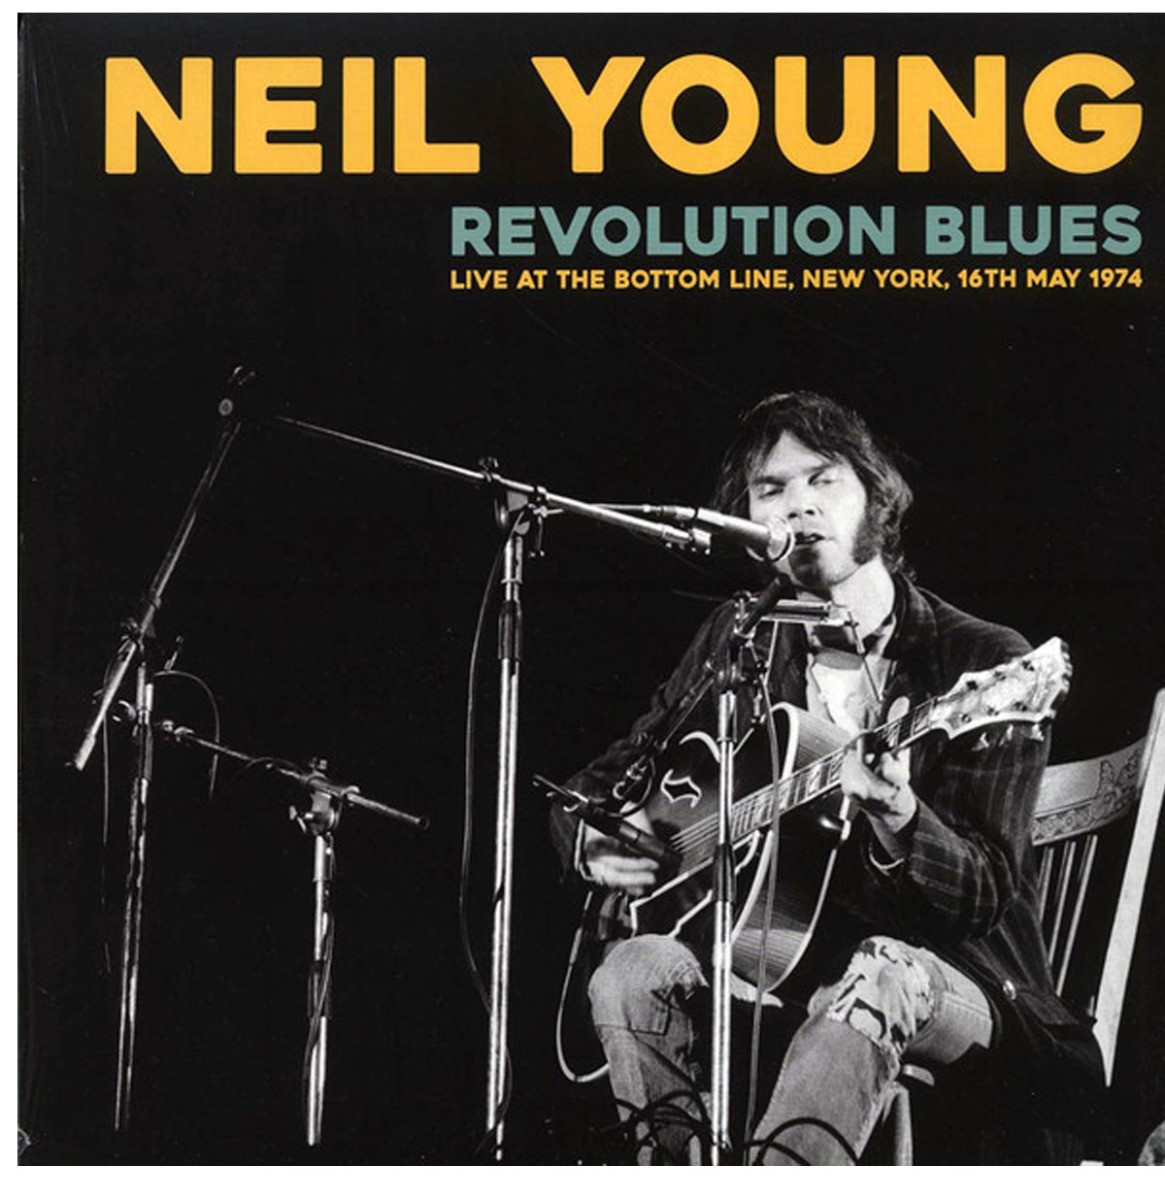 Neil Young: Revolution Blues Live At The Bottom Line, New York, 16 th May 1974